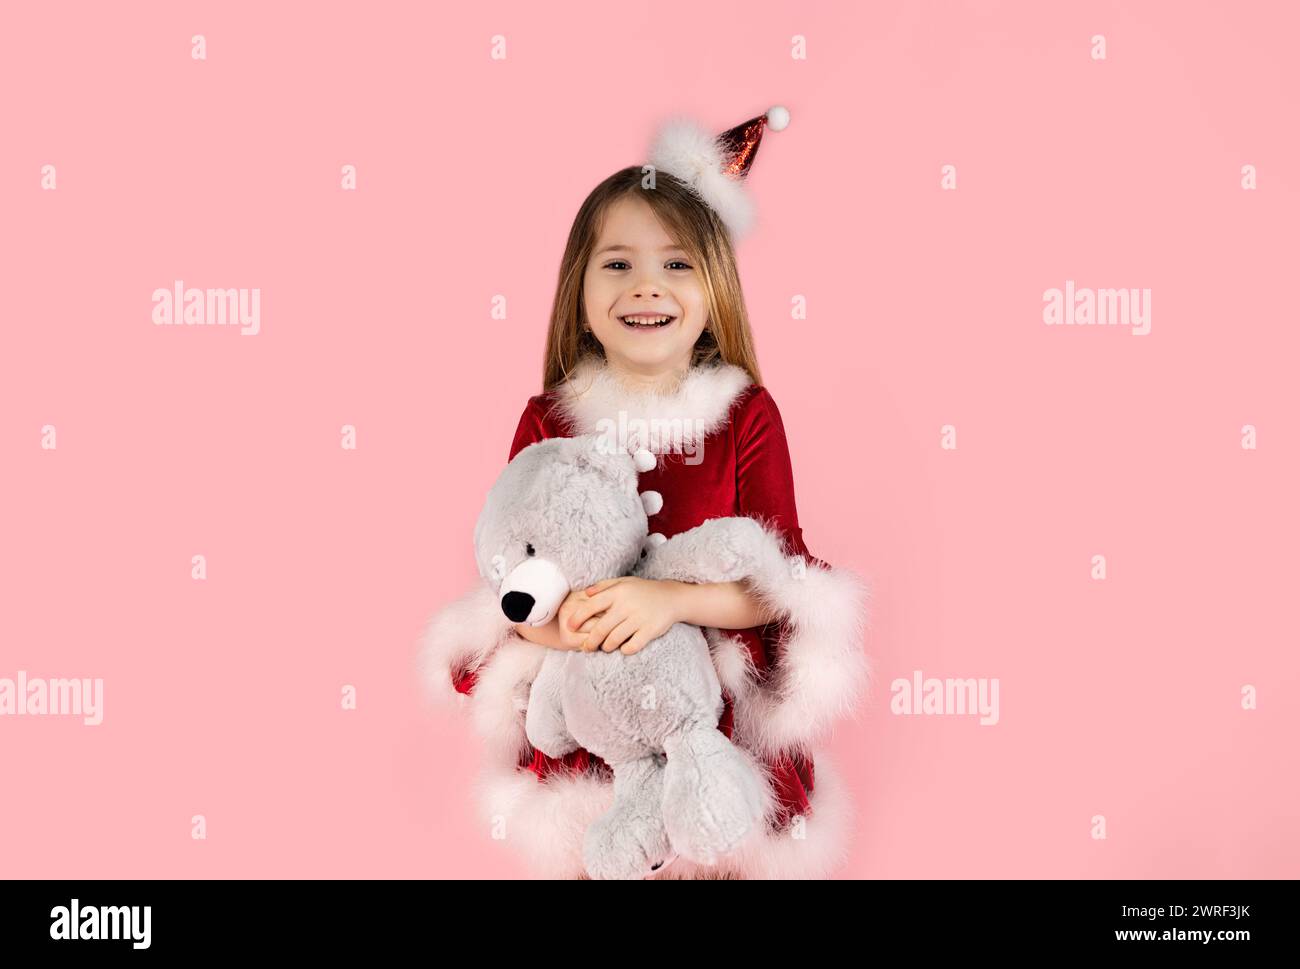 Christmas, teddy bear and happiness with a girl in studio with pink background, dressed in red Christmas dress. Bears the most wonderful Christmas gif Stock Photo